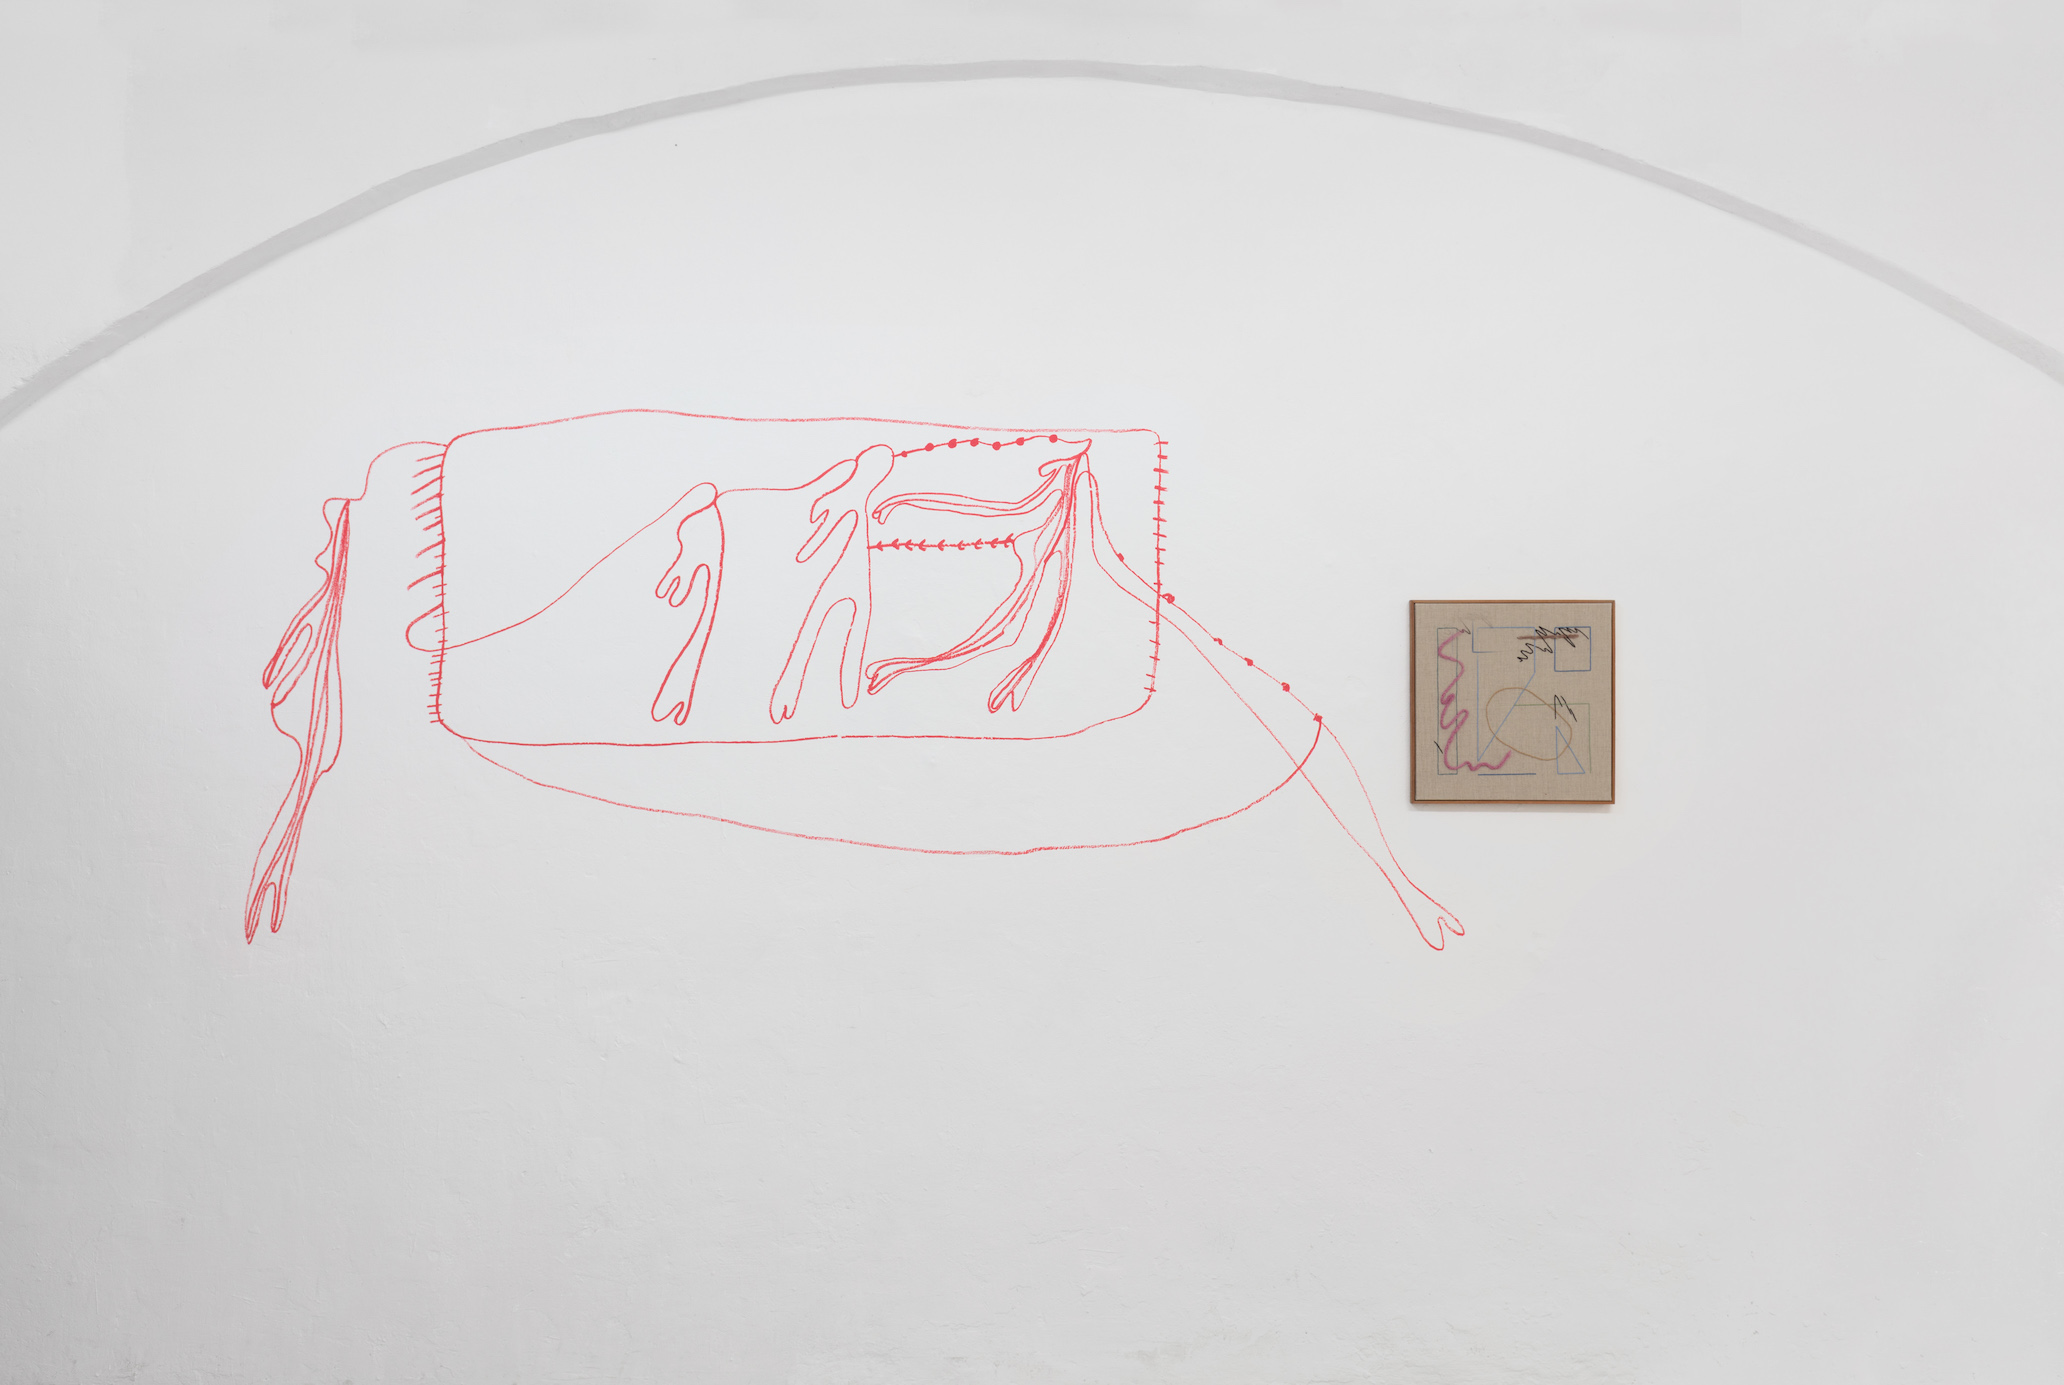 Fatima Moallim, drawing performance; Nadine Byrne, Echoes (20), 2019, Embroidery on linen